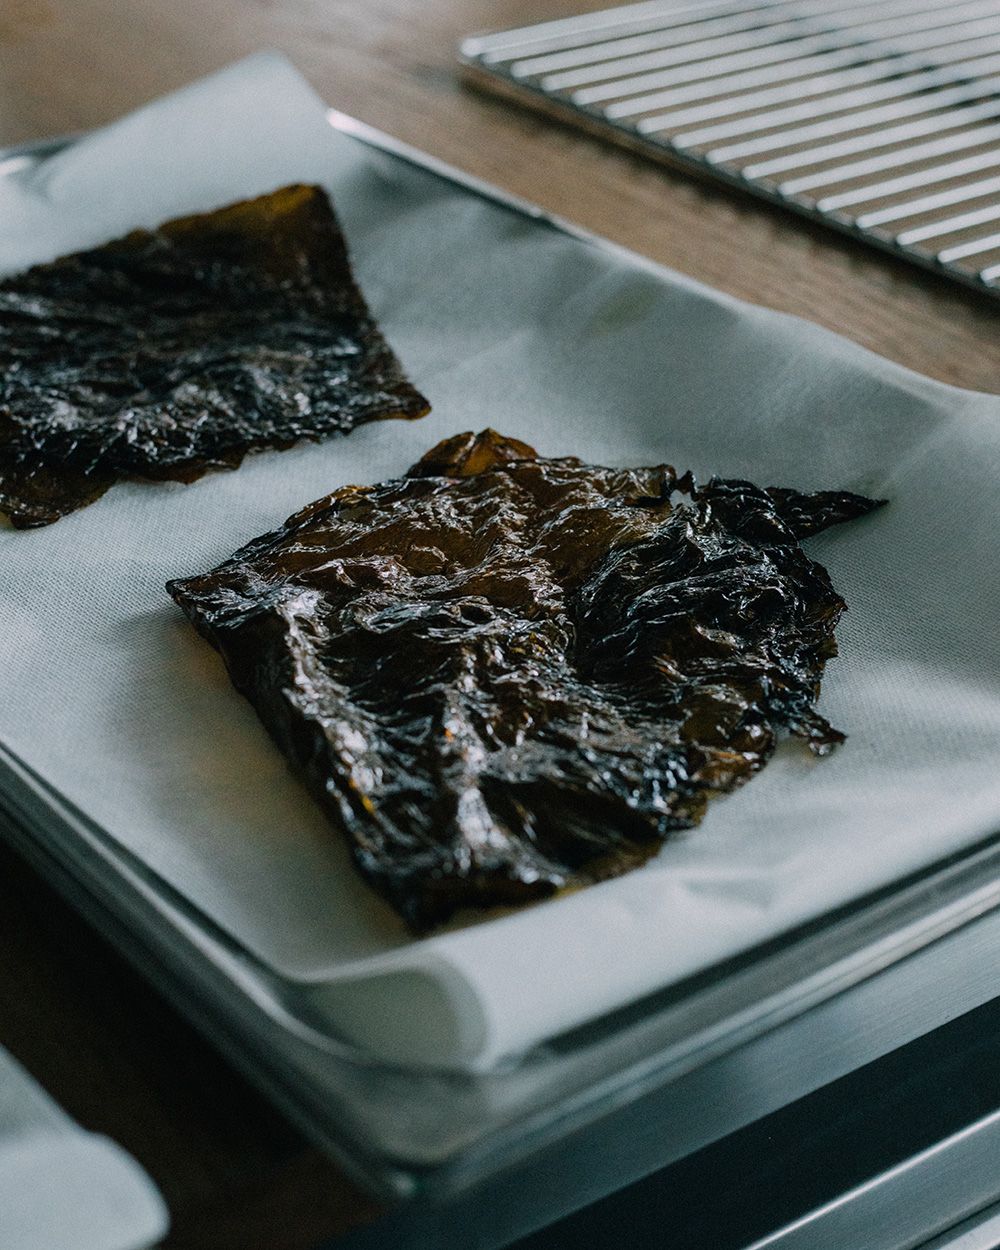 One Farmer / One Chef: Seaweed Mille-Feuille by Thomas Frebel of INUA